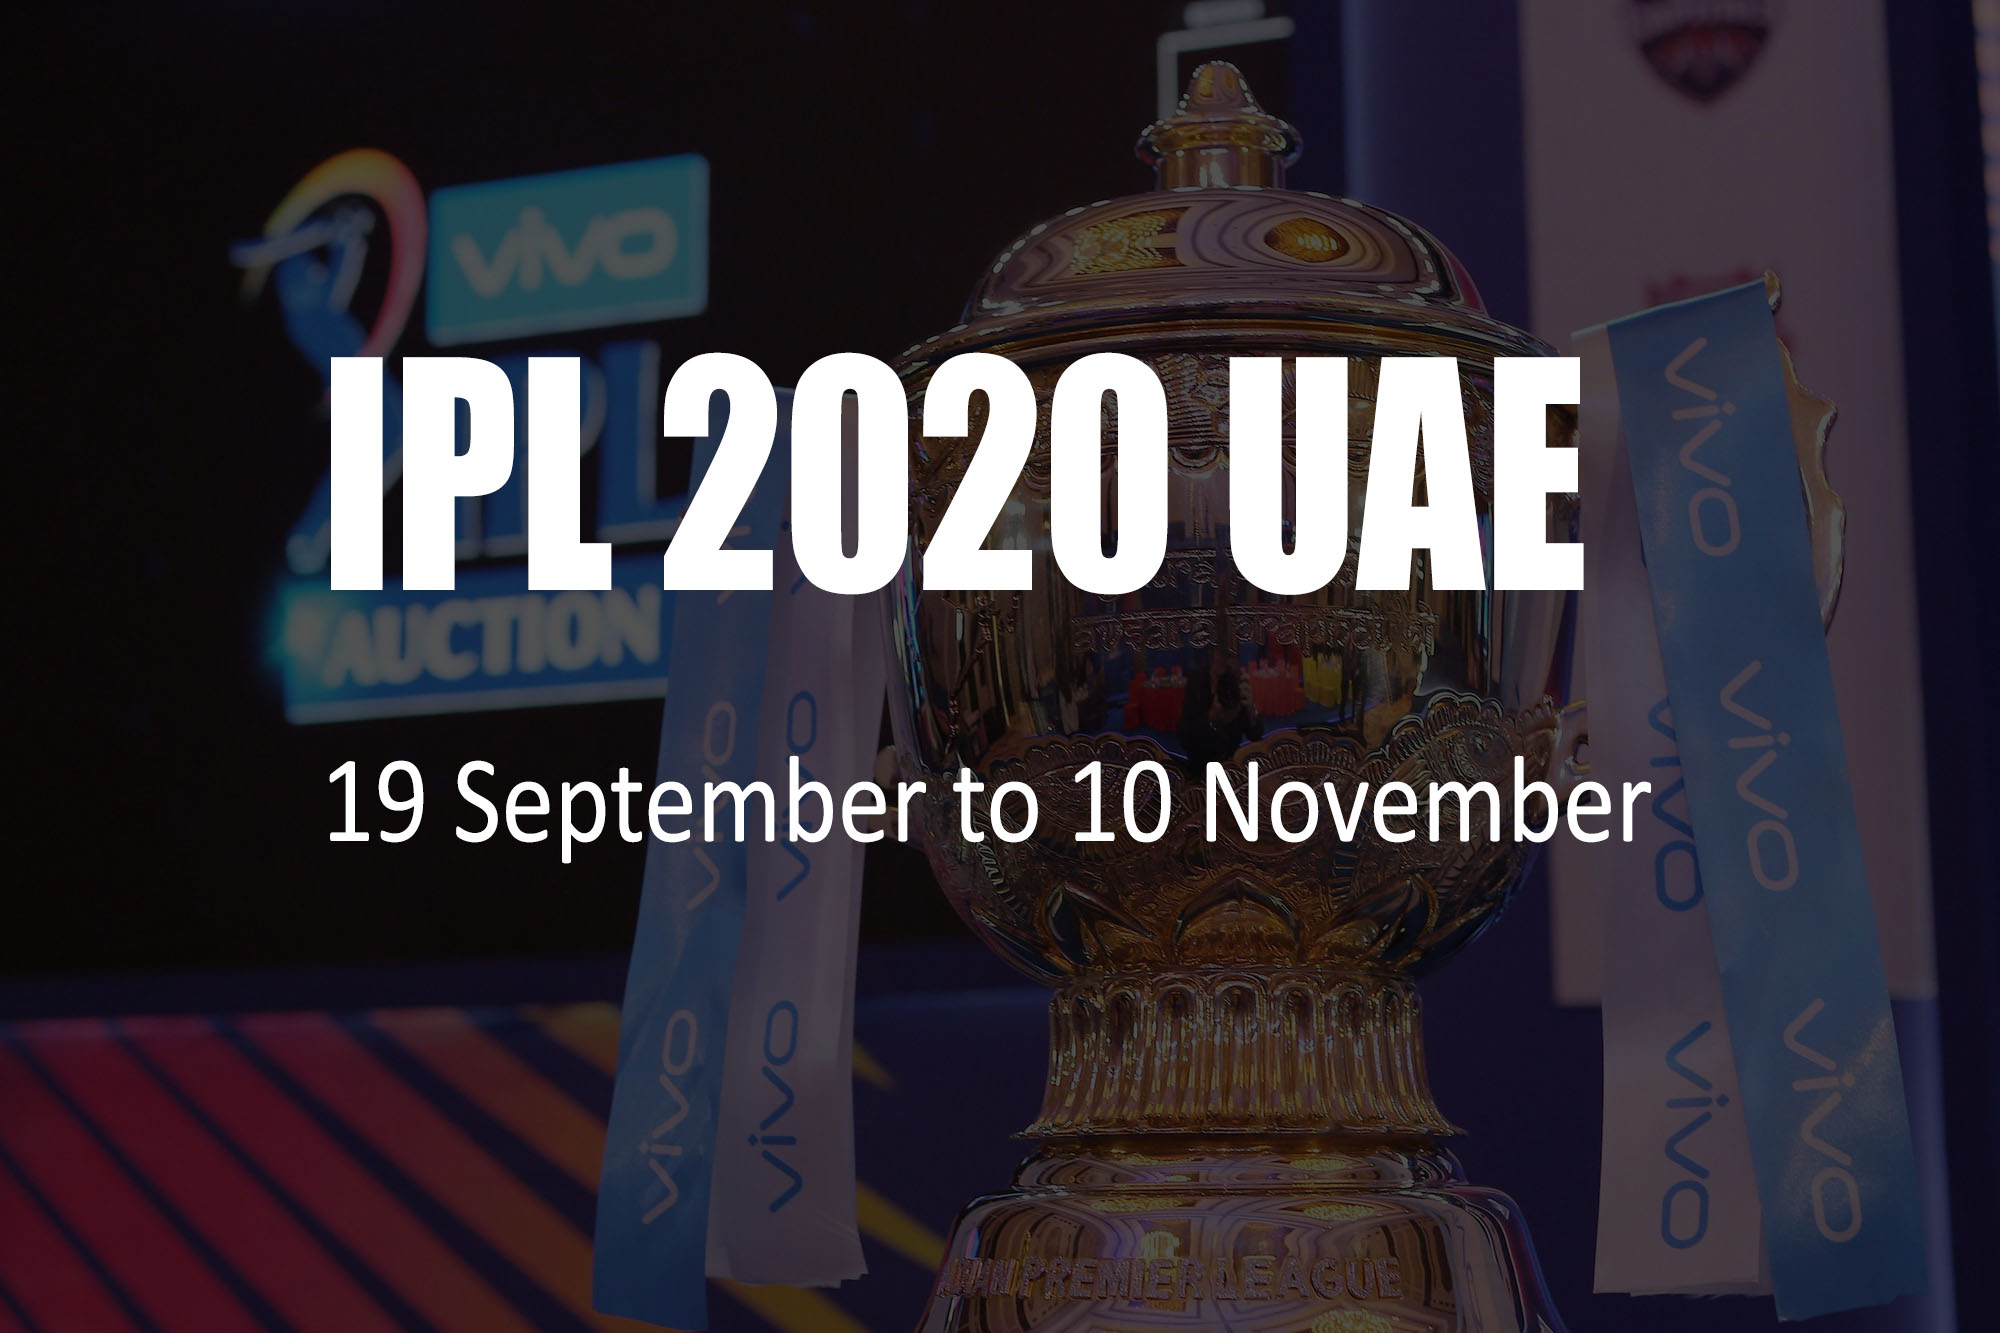 IPL 2020 Confirmed To Be Played from 19 September to 10 November